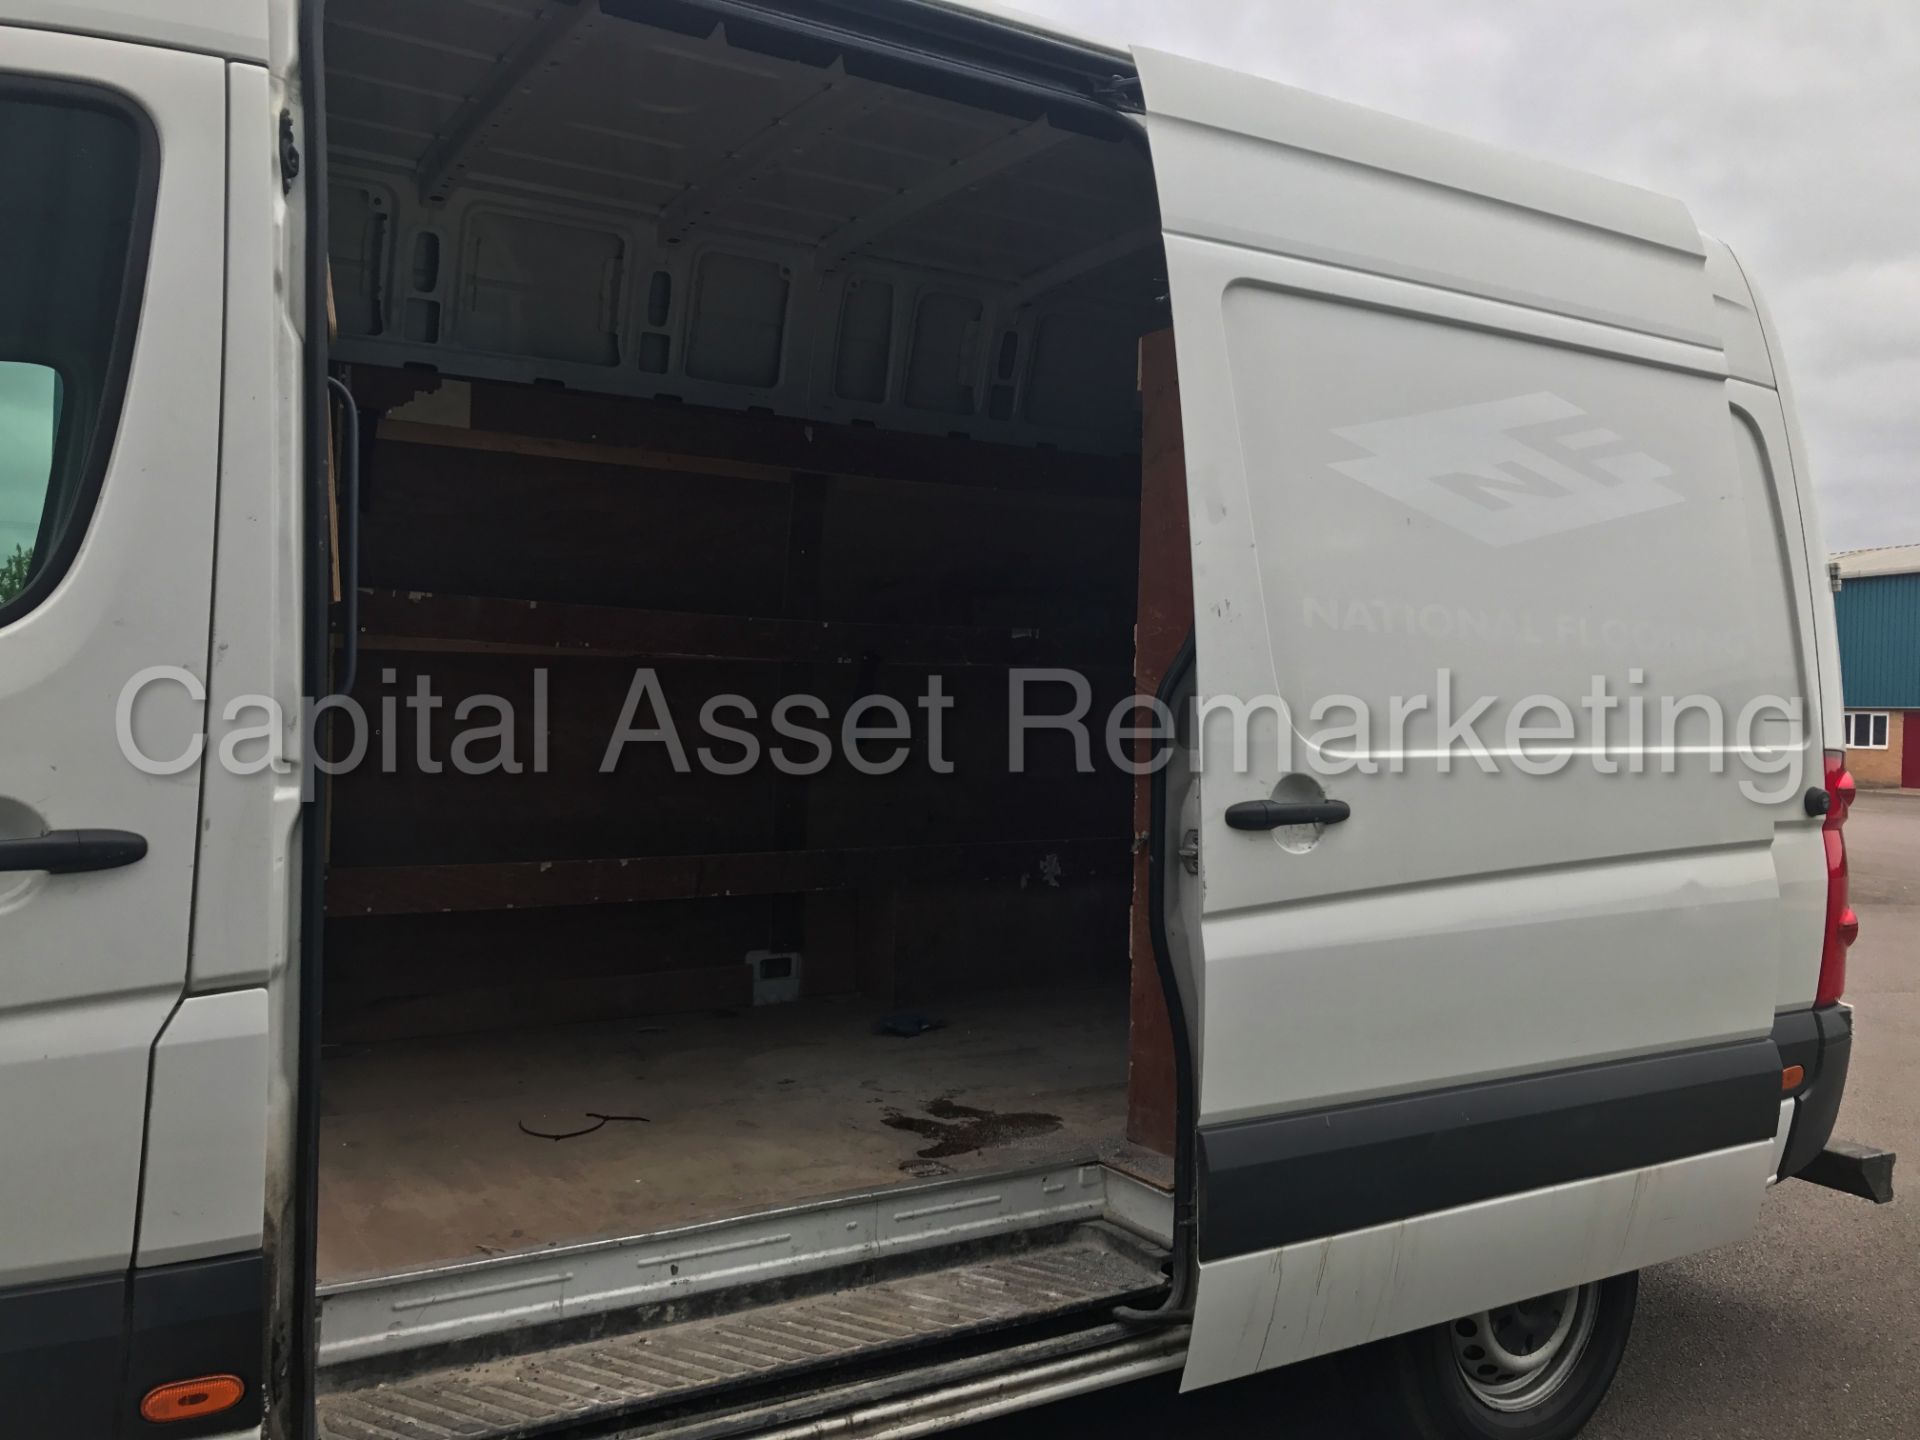 VOLKSWAGEN CRAFTER CR35 'MWB HI-ROOF' (2014) '2.0 TDI - 109 PS - 6 SPEED' *1 COMPANY OWNER FROM NEW* - Image 15 of 19